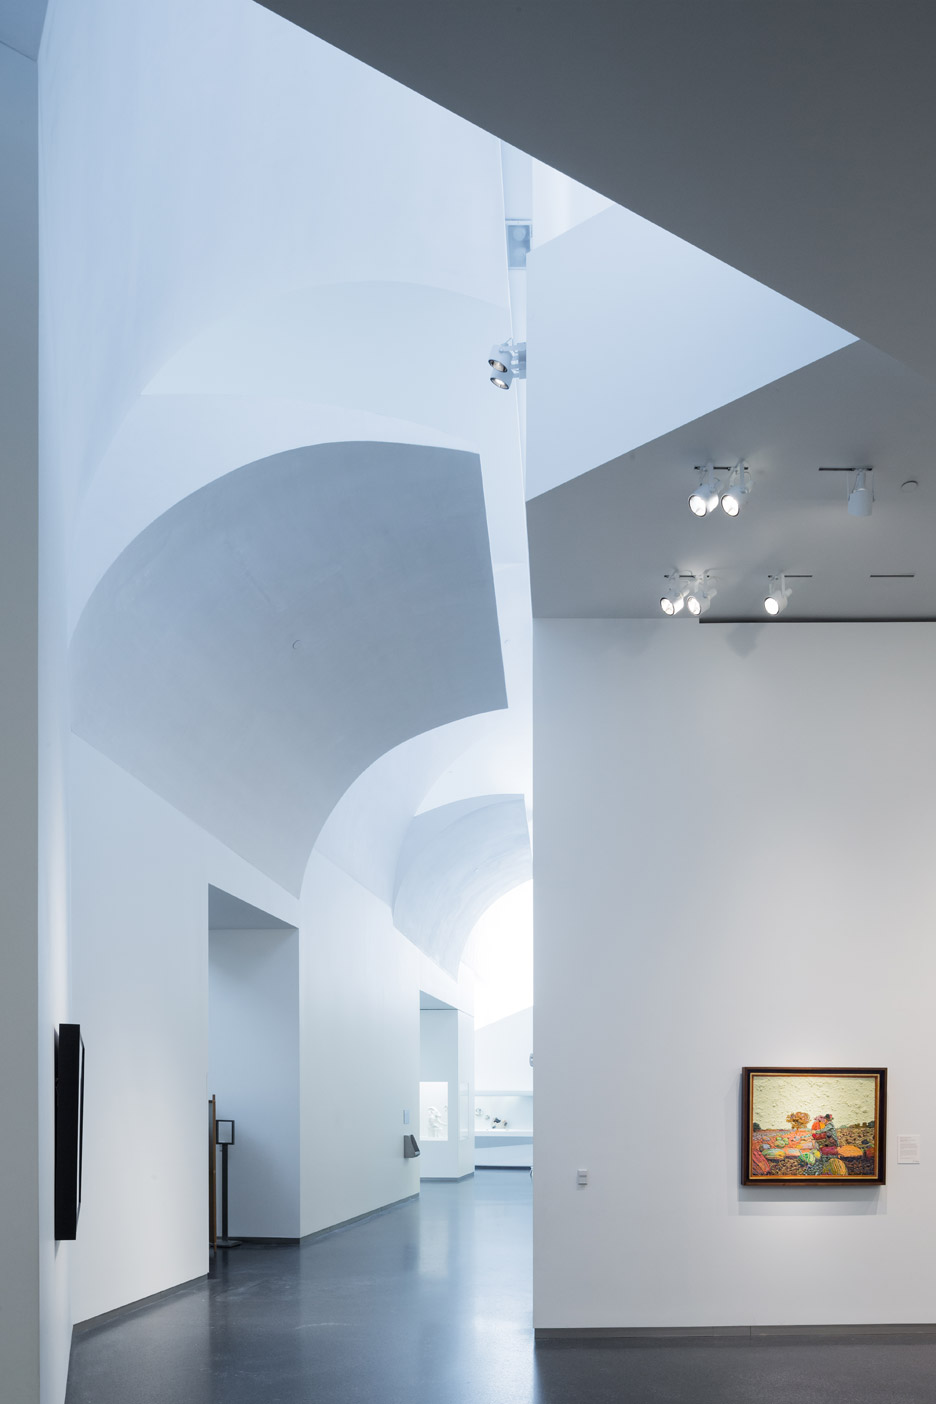 Iwan Baan photographs the Nelson Atkins Museum by Steven Holl to celebrate the new building's 10th anniversary